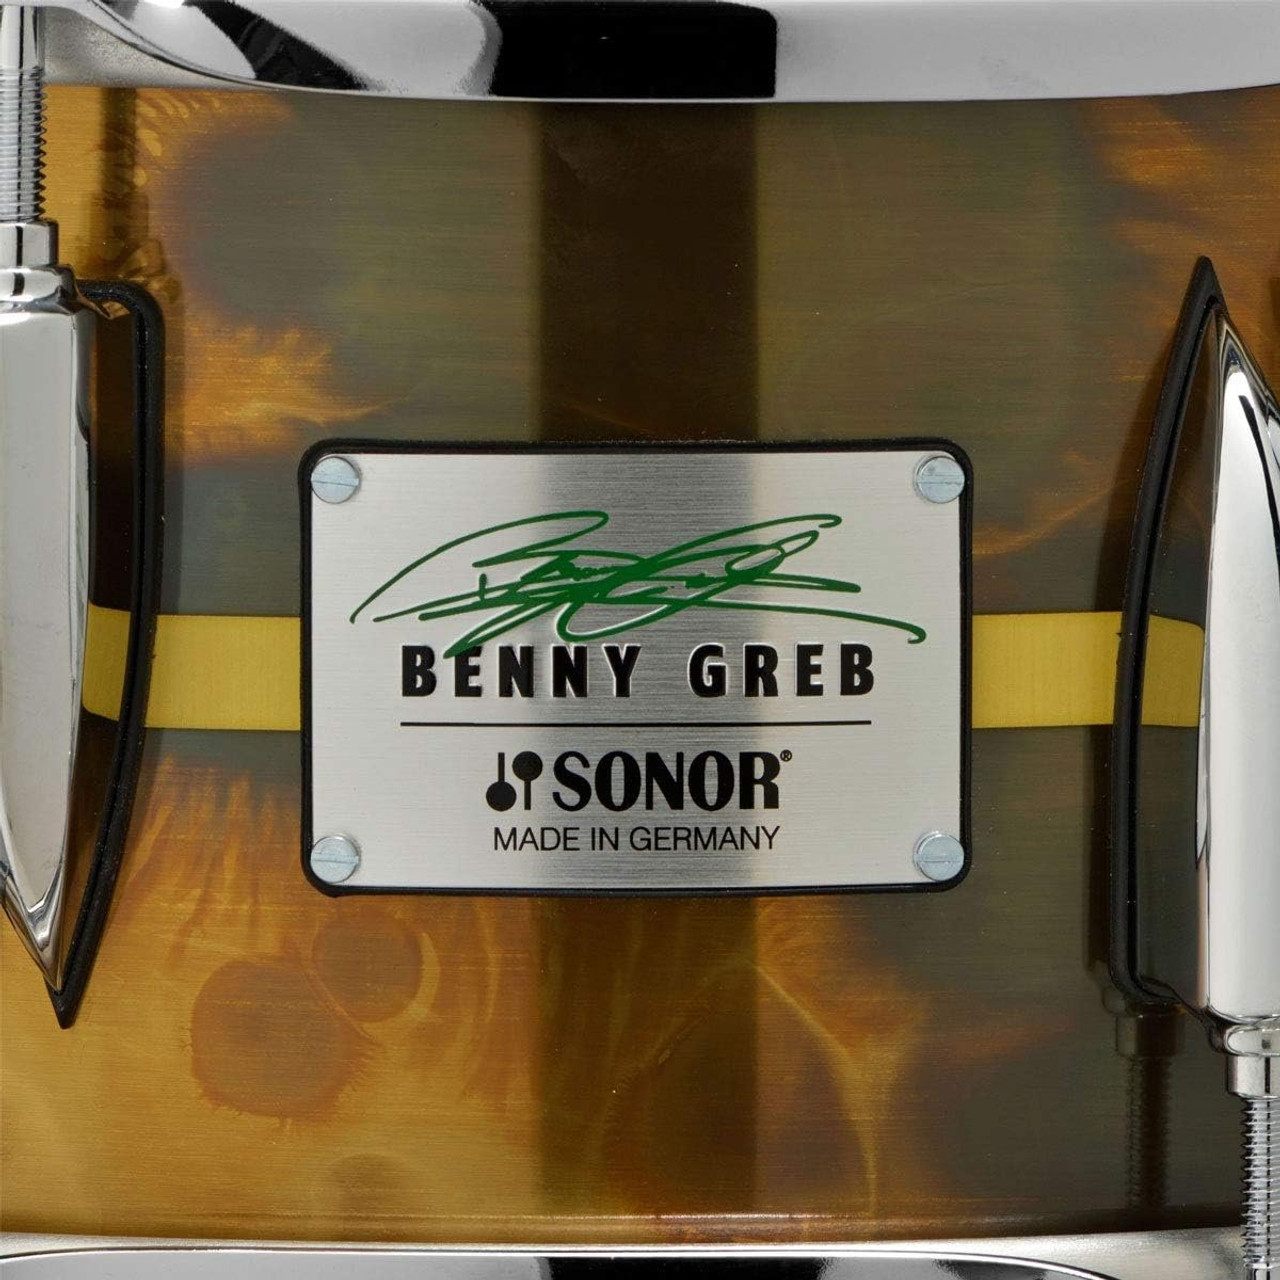 Sonor Benny Greb Signature Snare 13 x 5.75 inch Brass Pineville Music